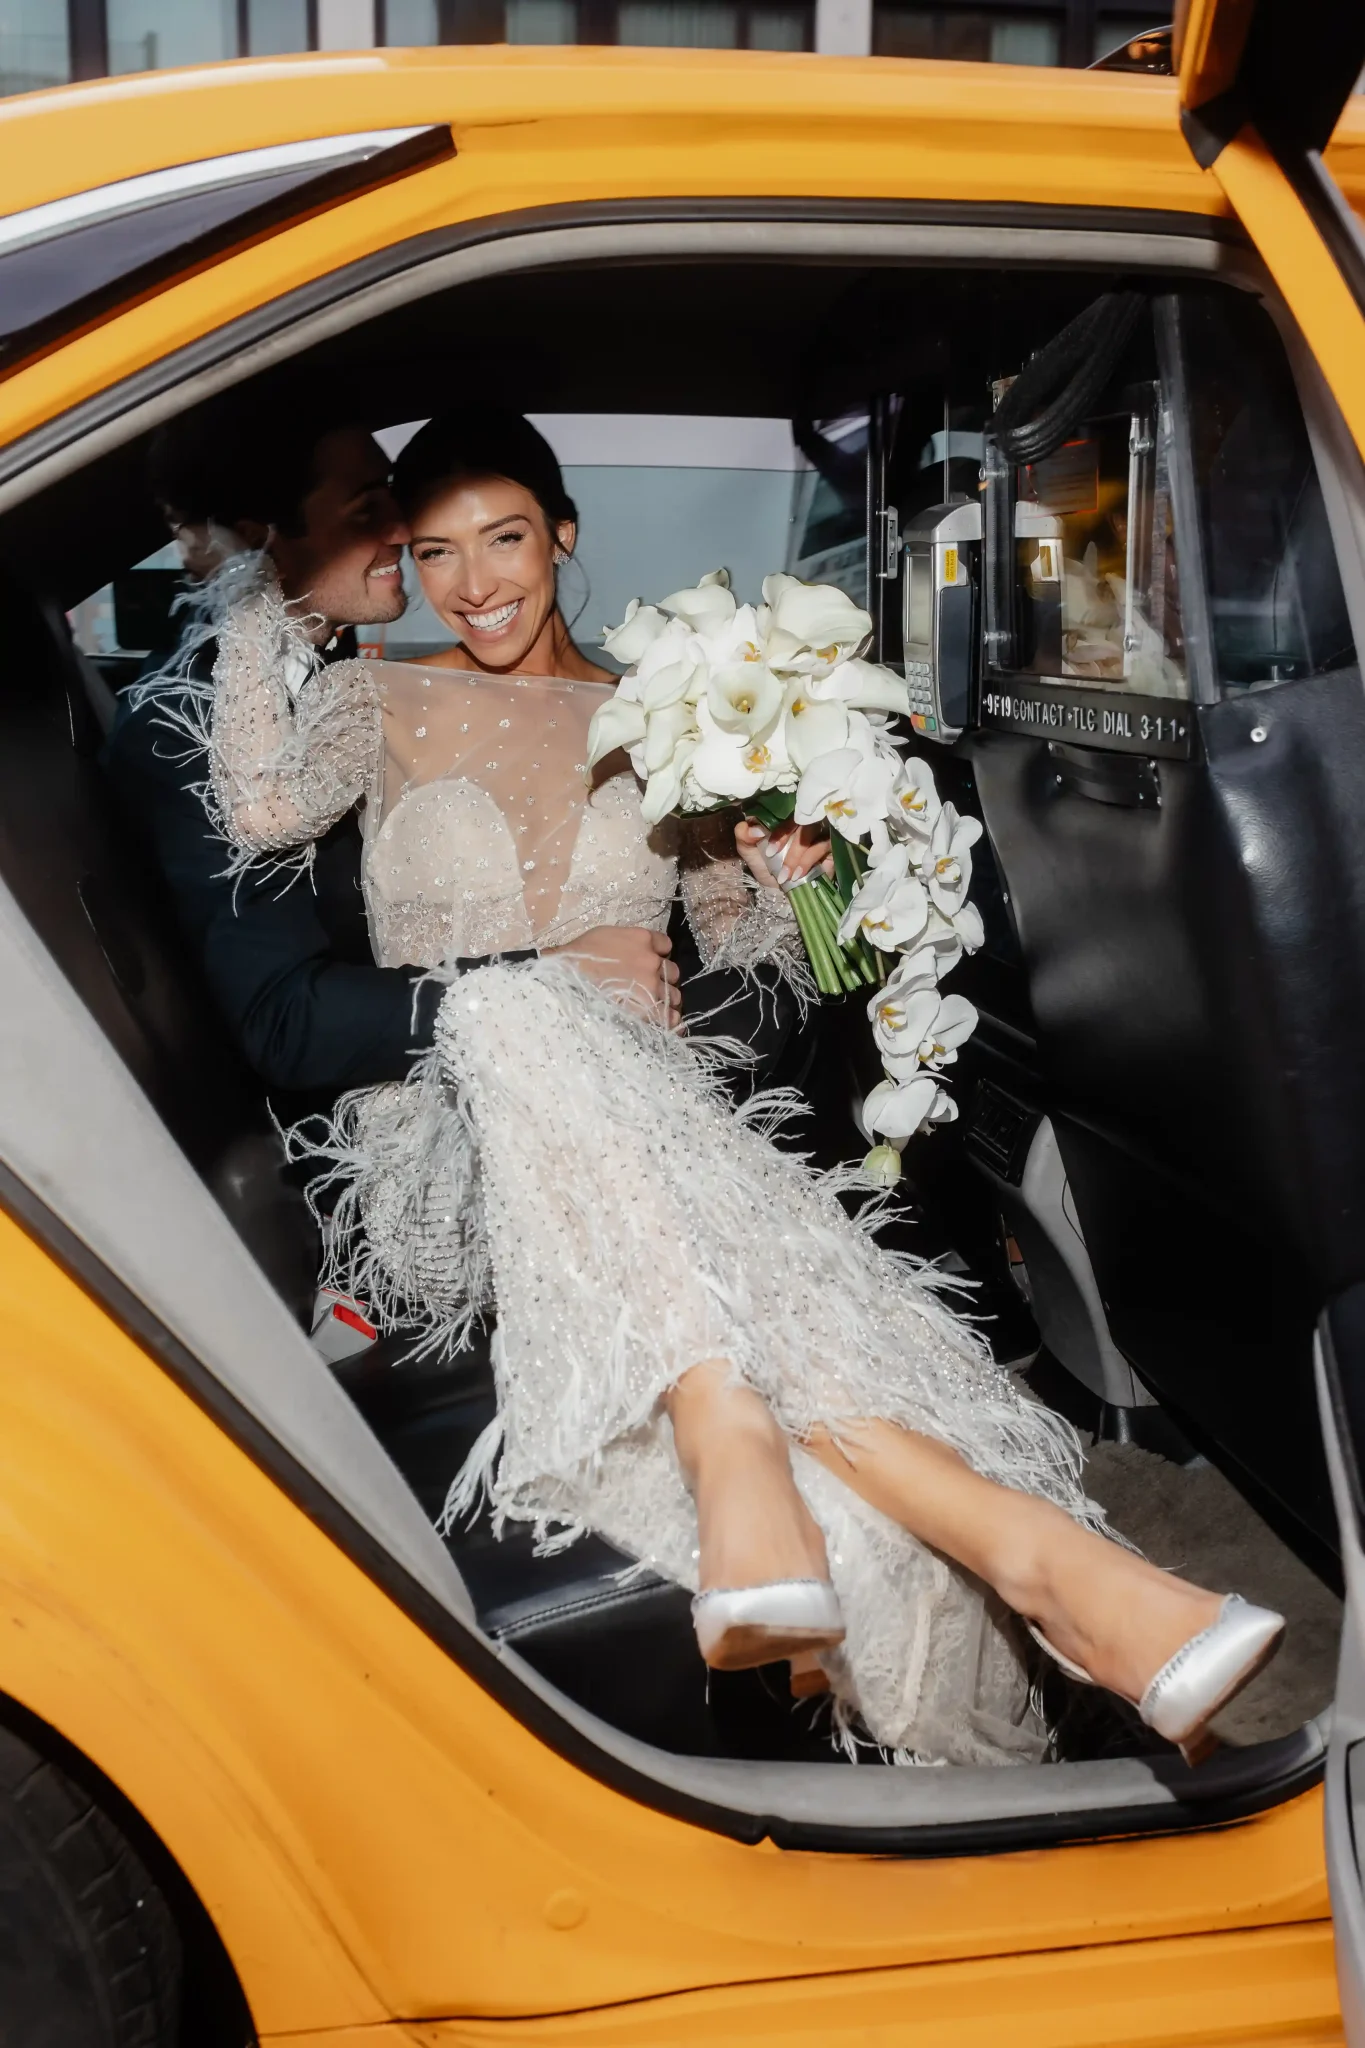 A bride and groom sitting in the back seat of a yellow cab.